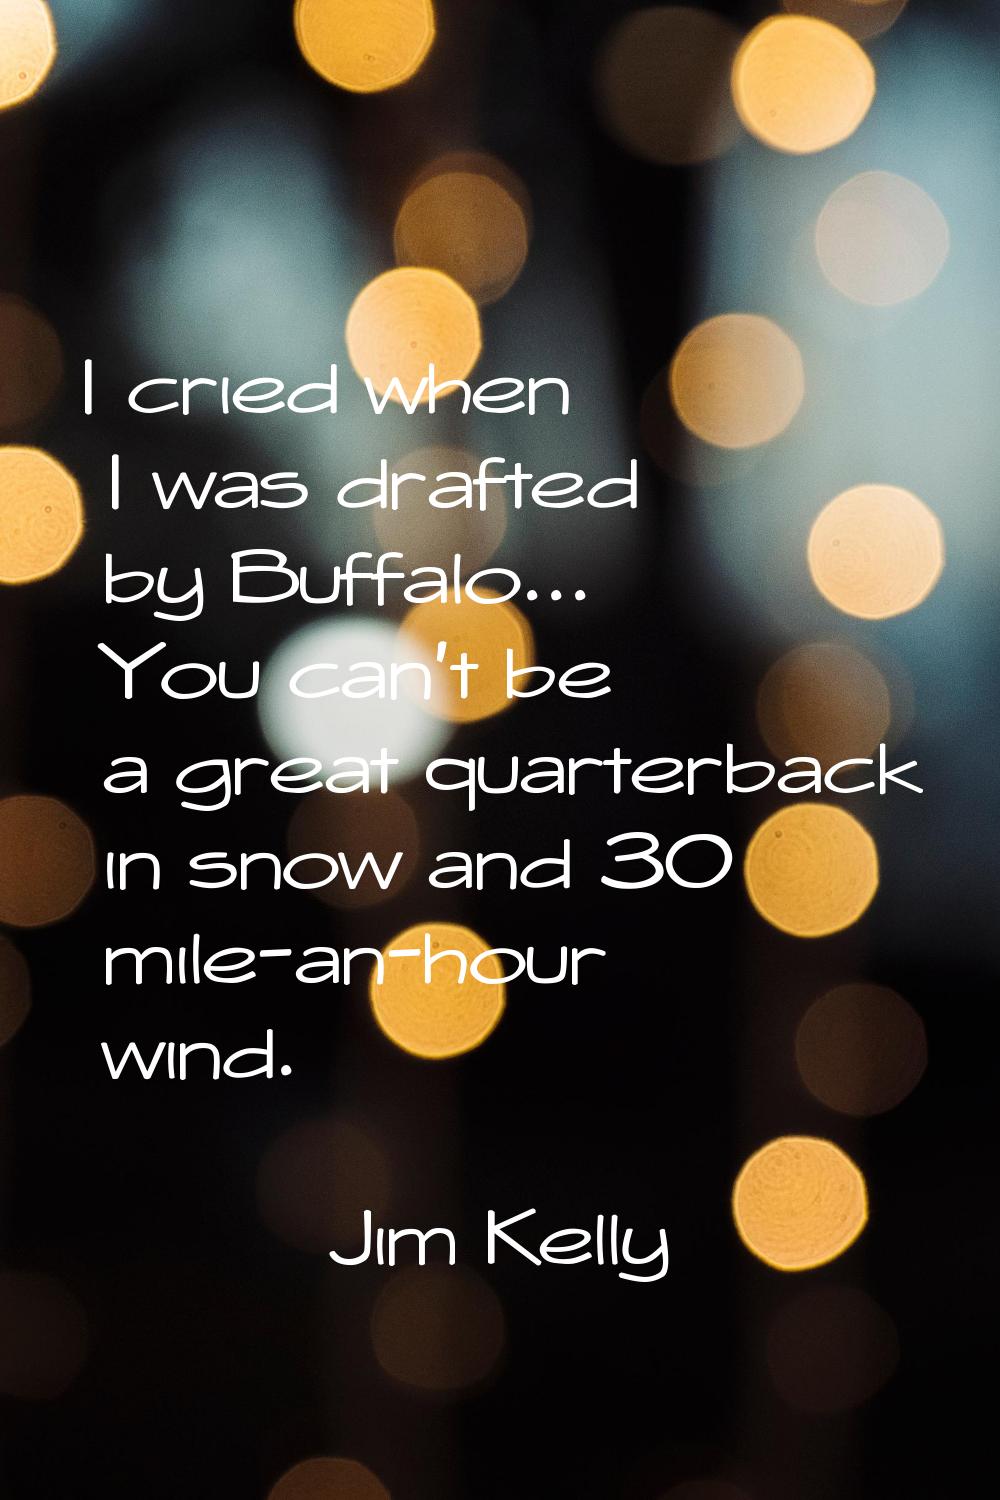 I cried when I was drafted by Buffalo... You can't be a great quarterback in snow and 30 mile-an-ho